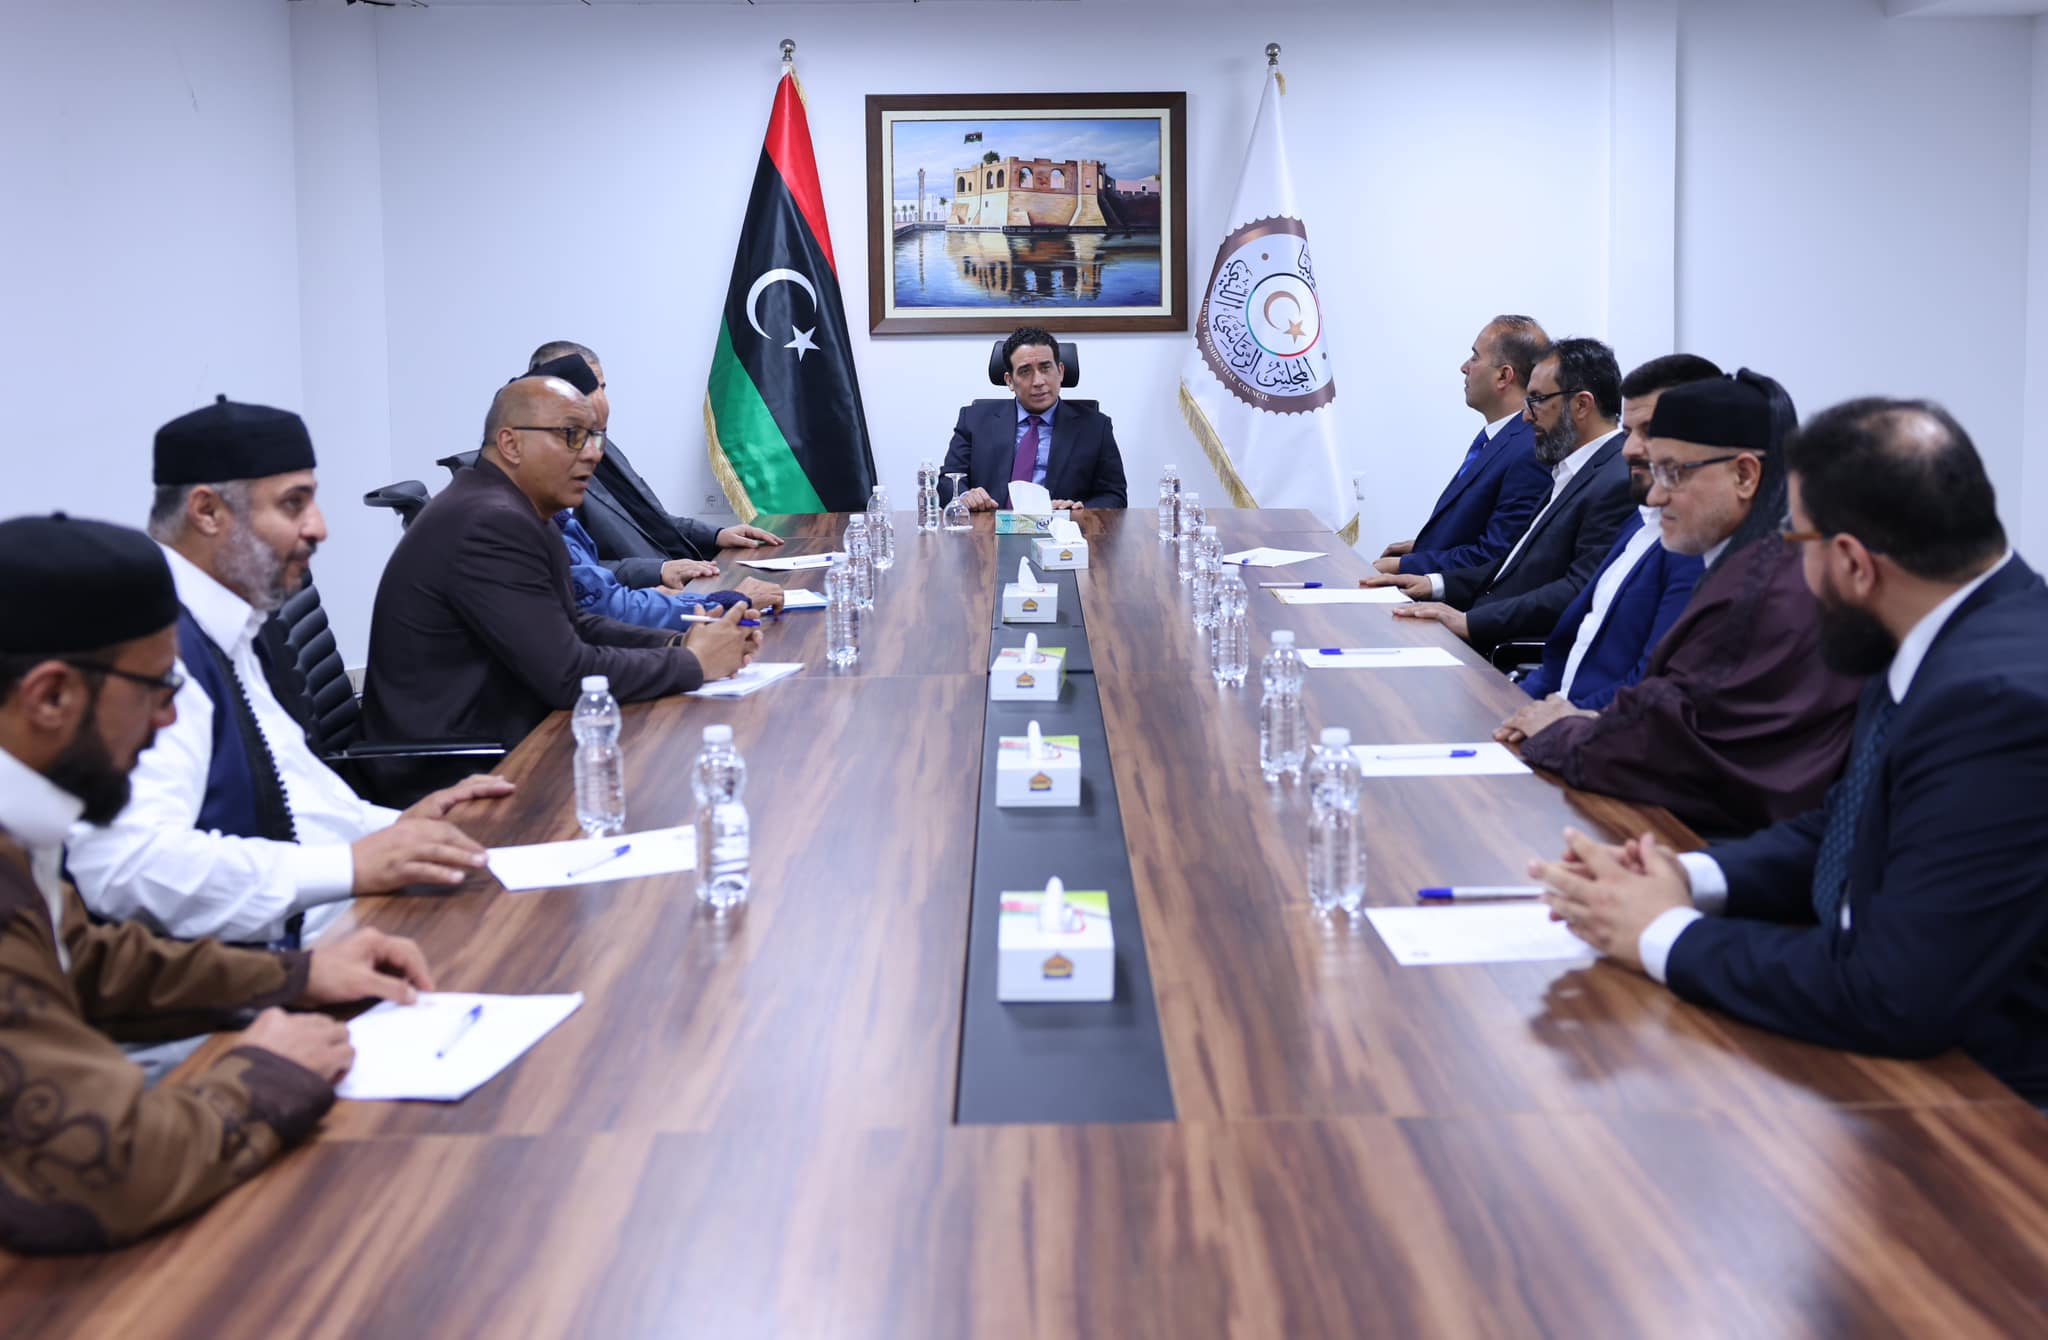 The Karaghla tribe confirms its keenness on the success of the project of national reconciliation and the unity of Libya